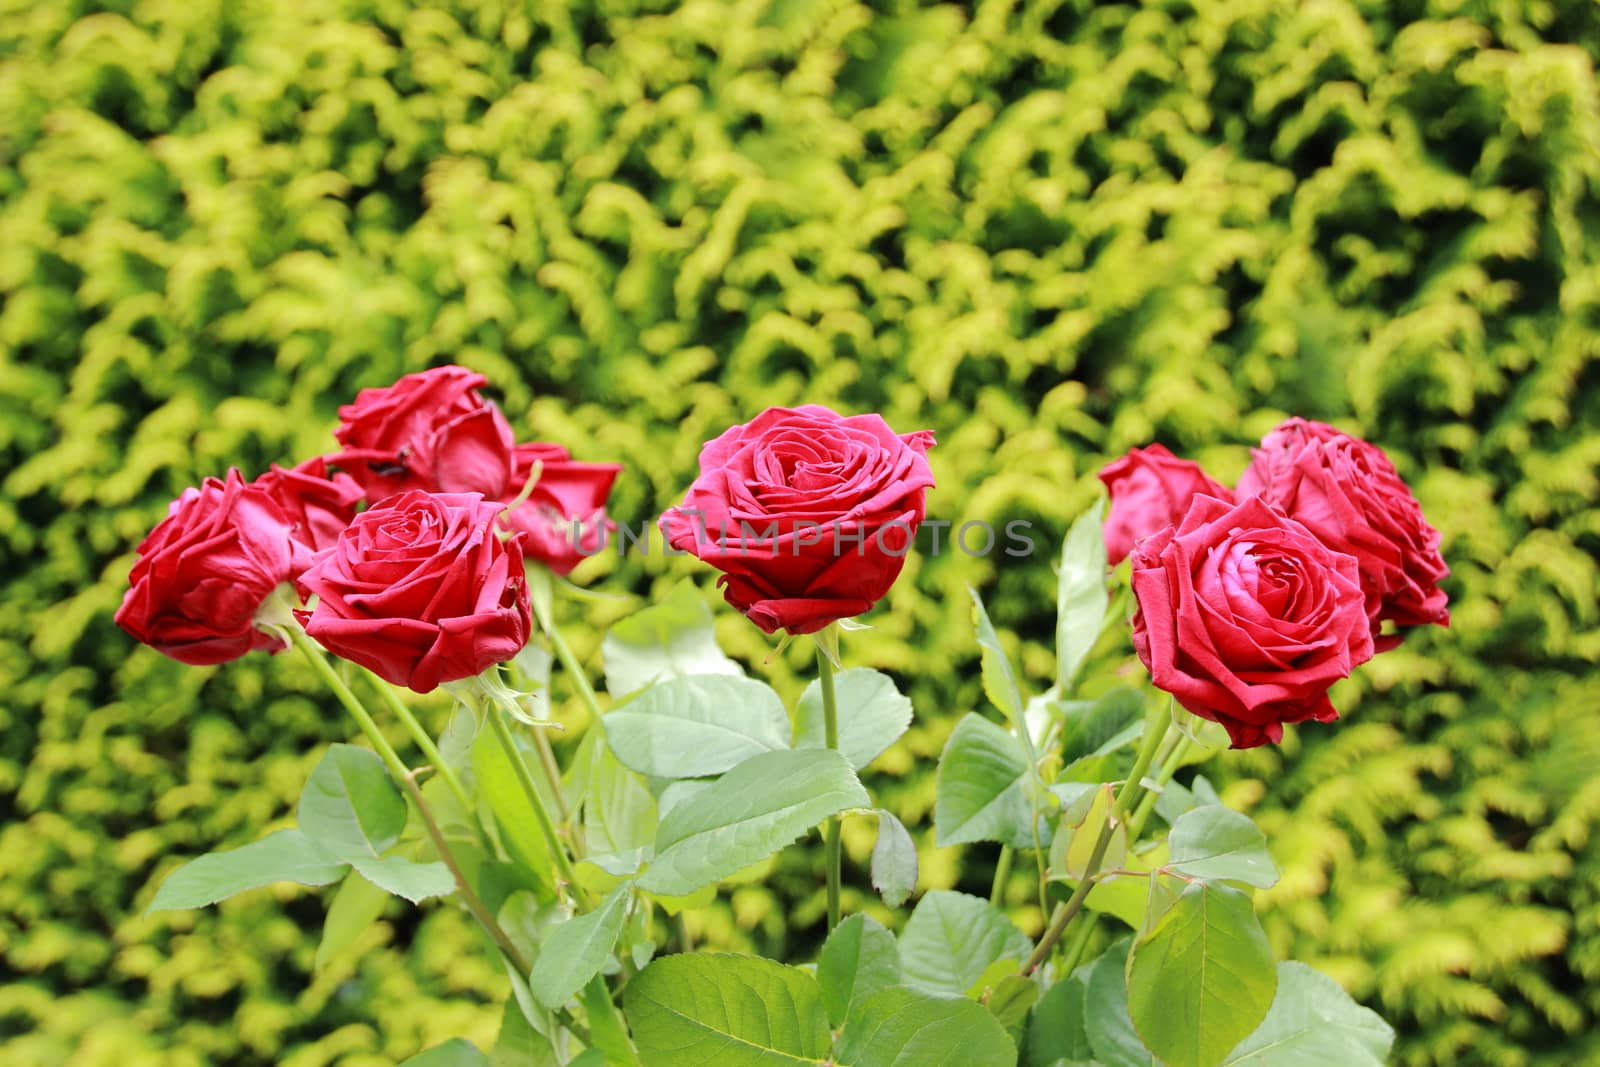 Bunch of red roses with green background